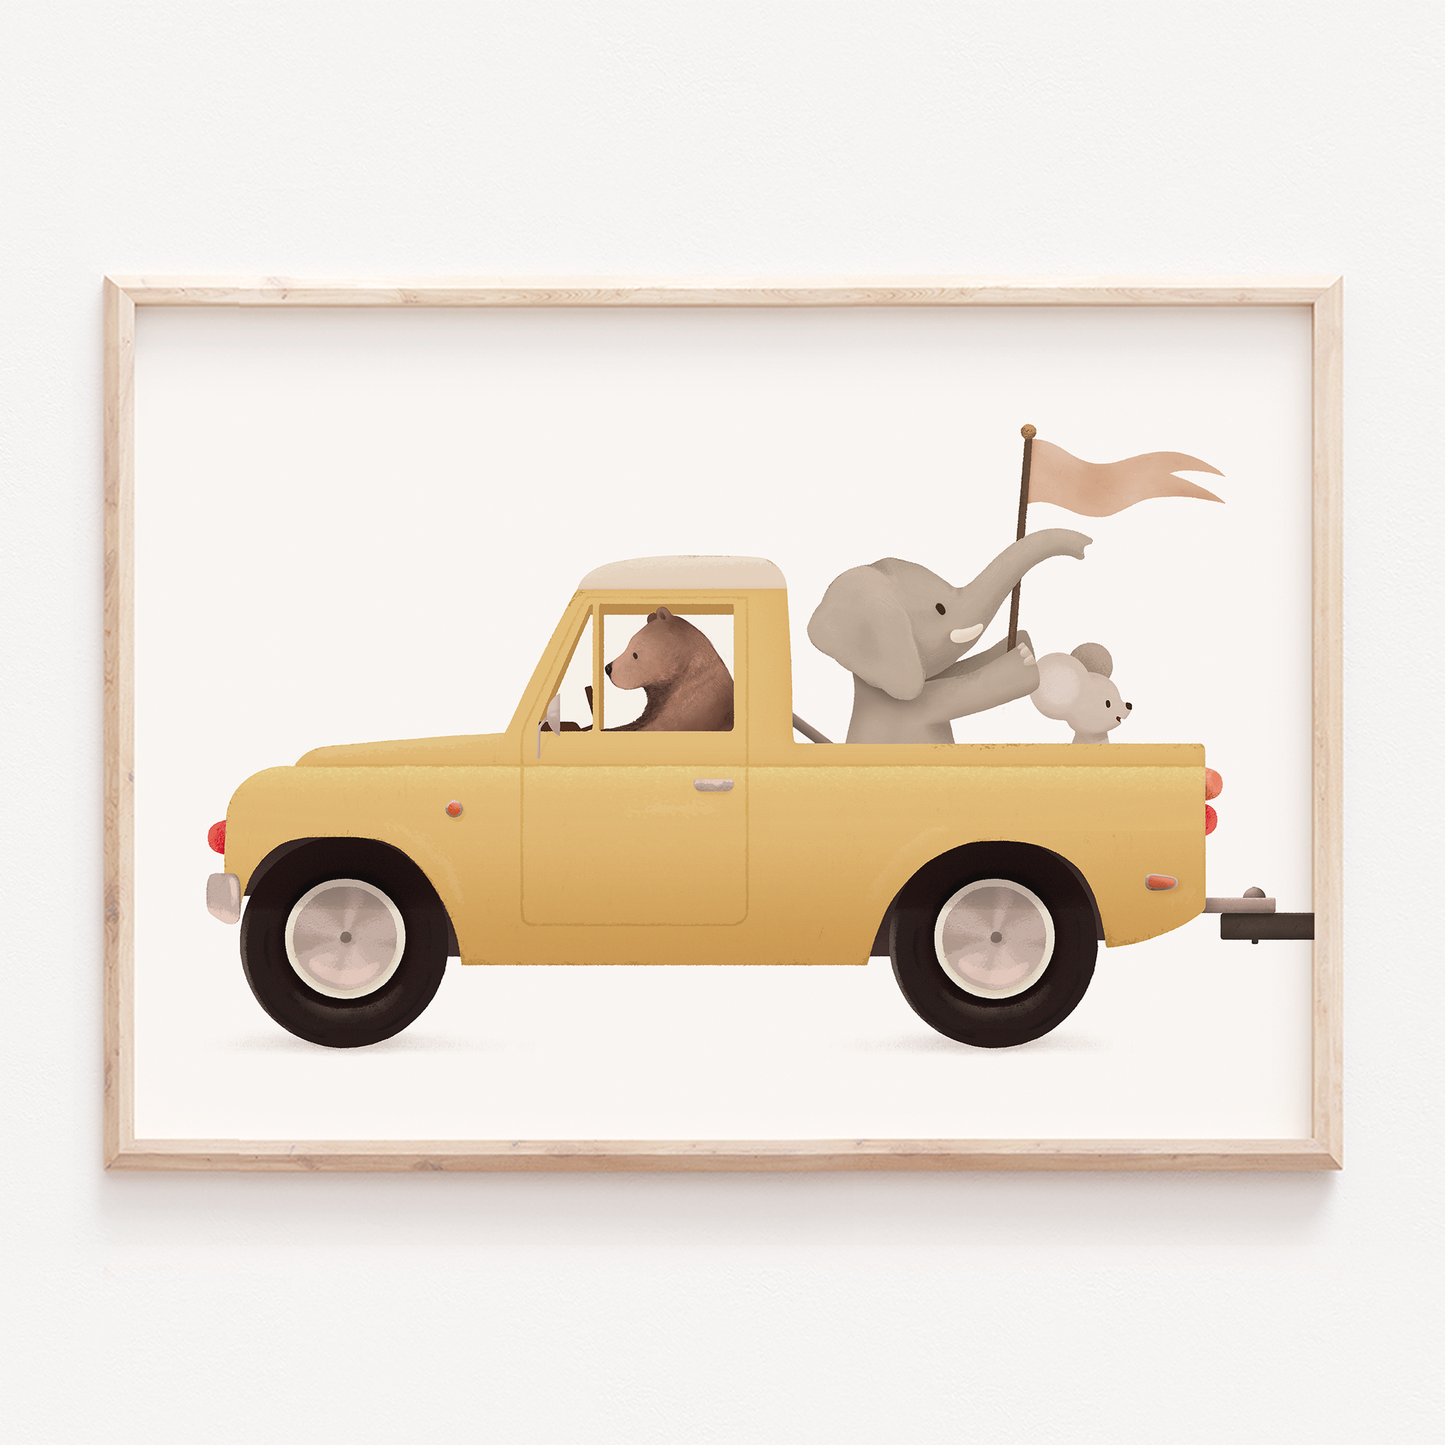 Whimsical animals - Truck and van set